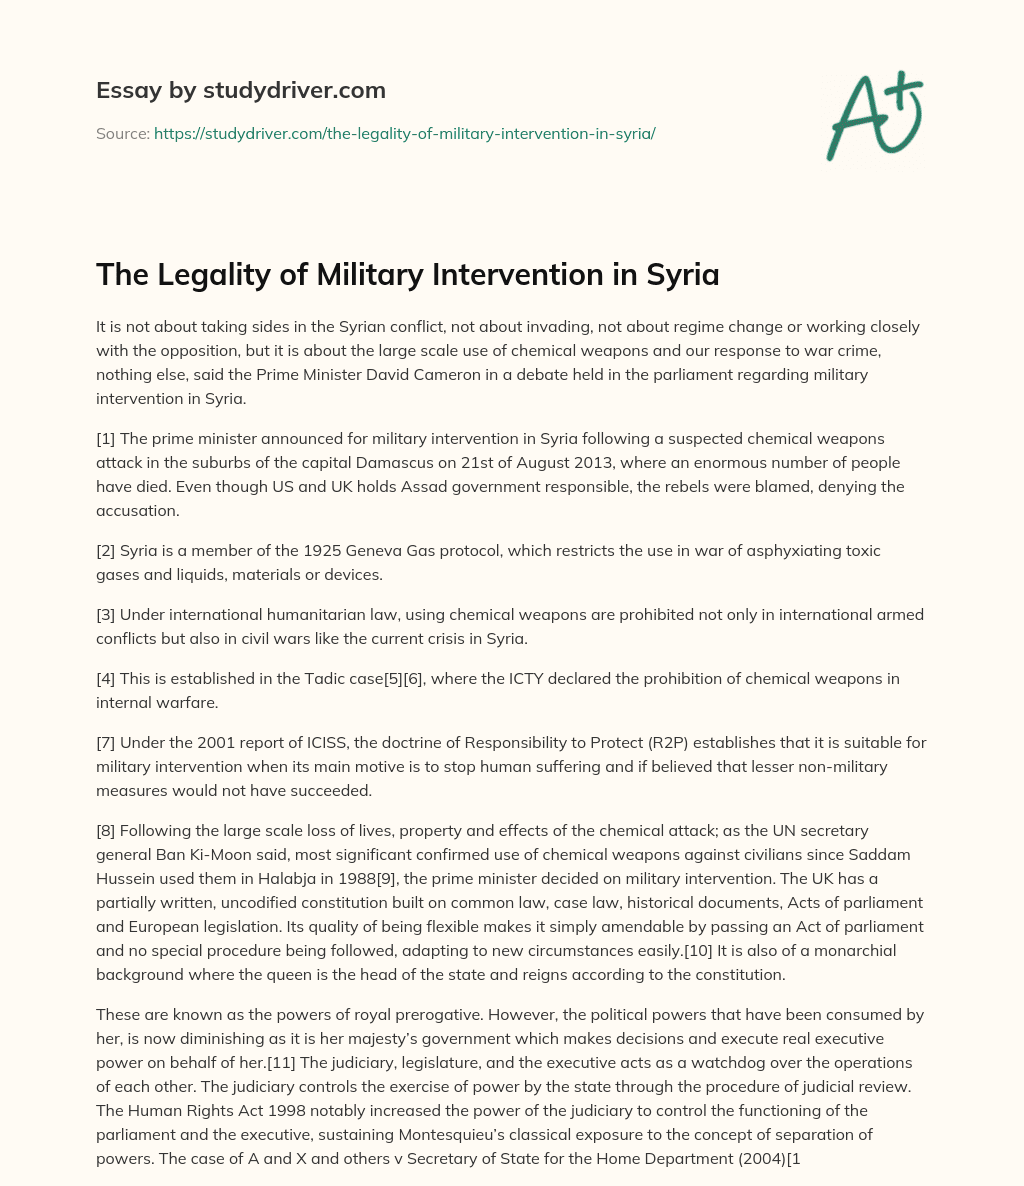 The Legality of Military Intervention in Syria essay